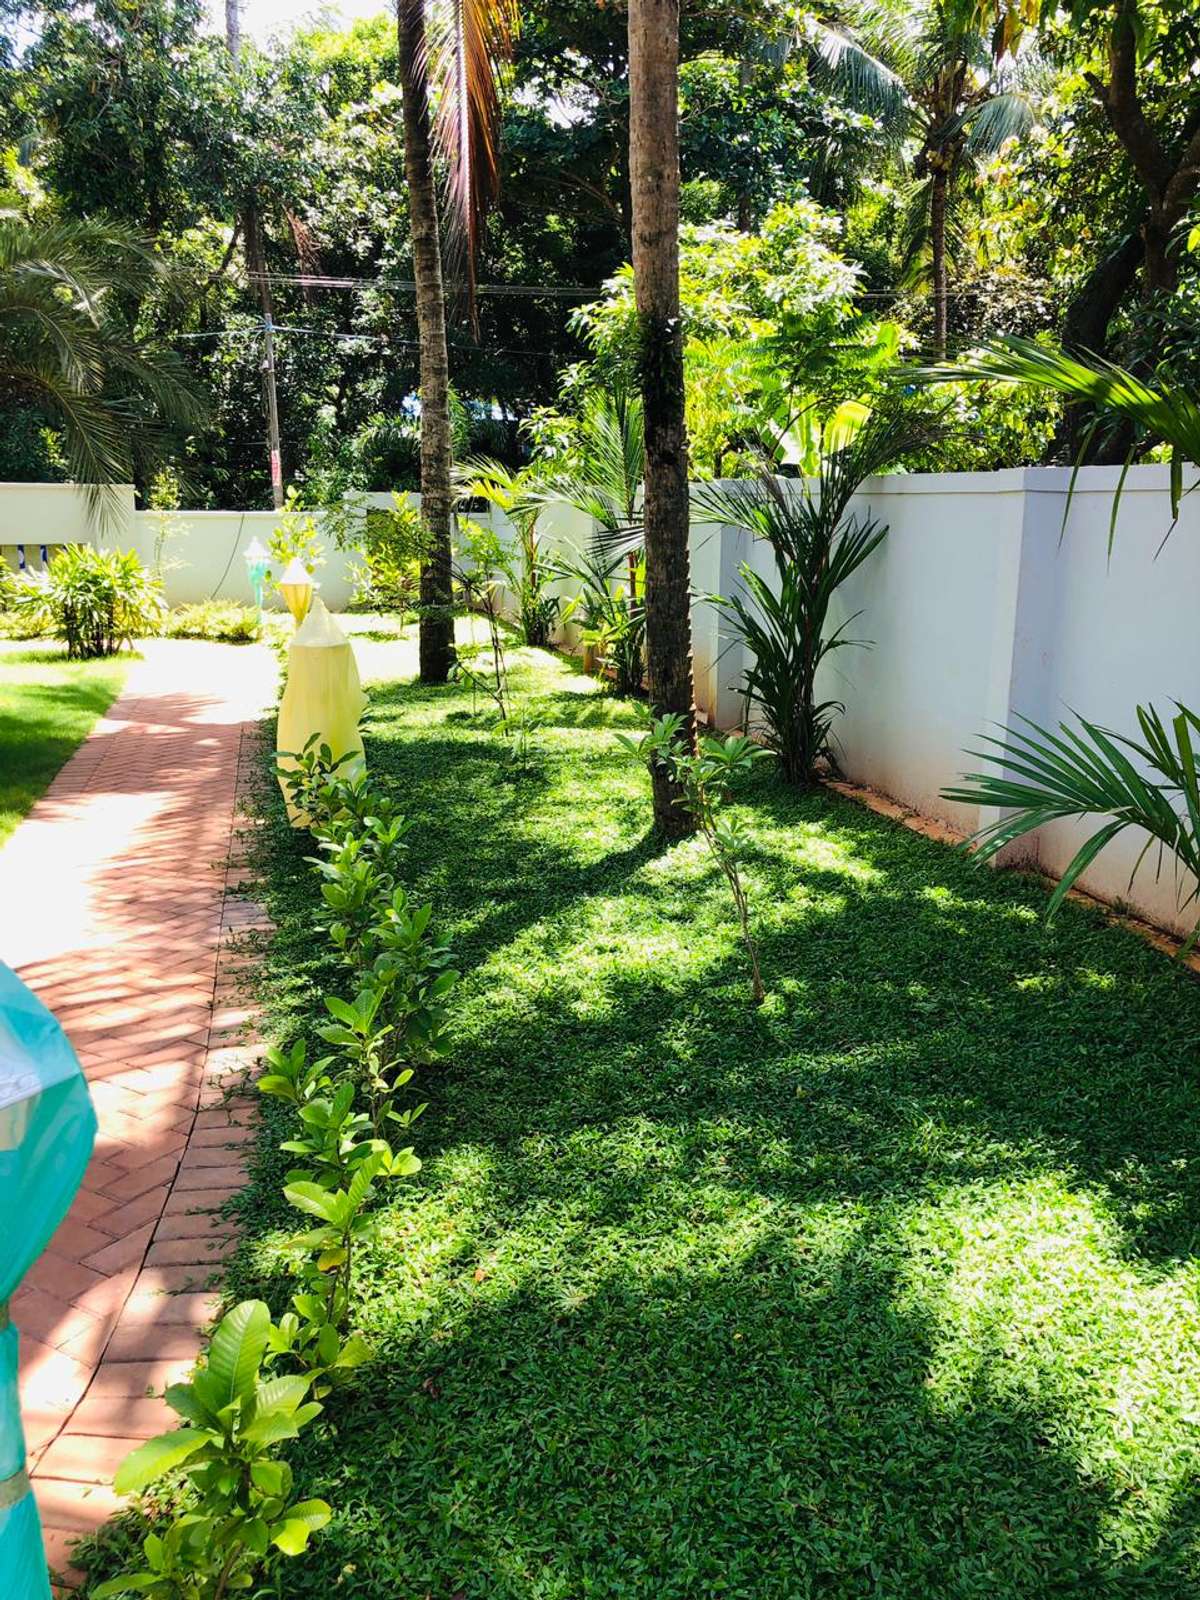 Designs by Gardening & Landscaping Glaid architecture interiors, Kozhikode | Kolo